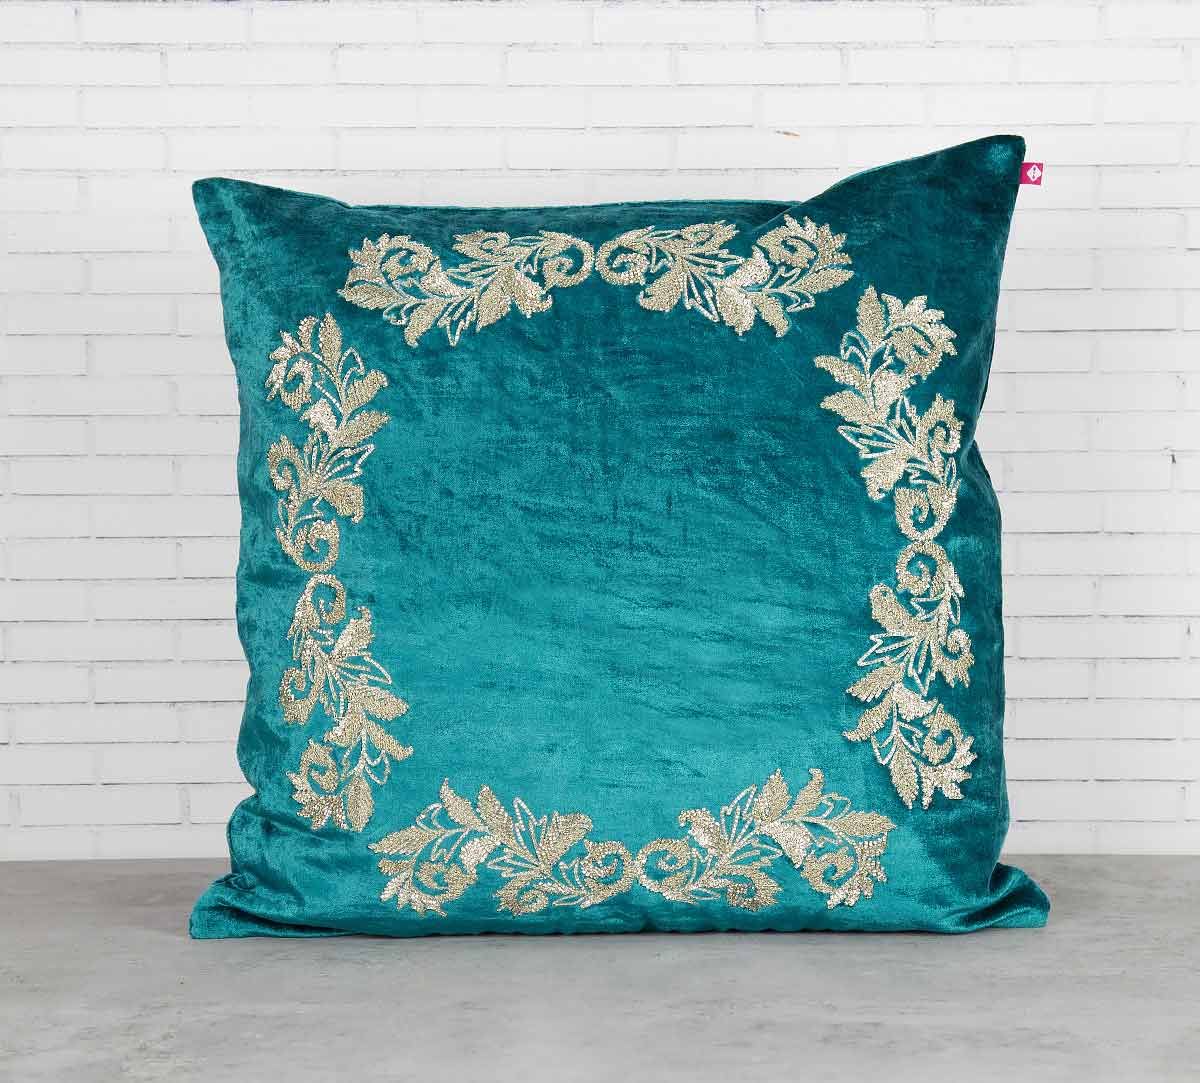 India Circus Floral Enigma Peacock Green Embroidered Velvet Cushion Cover